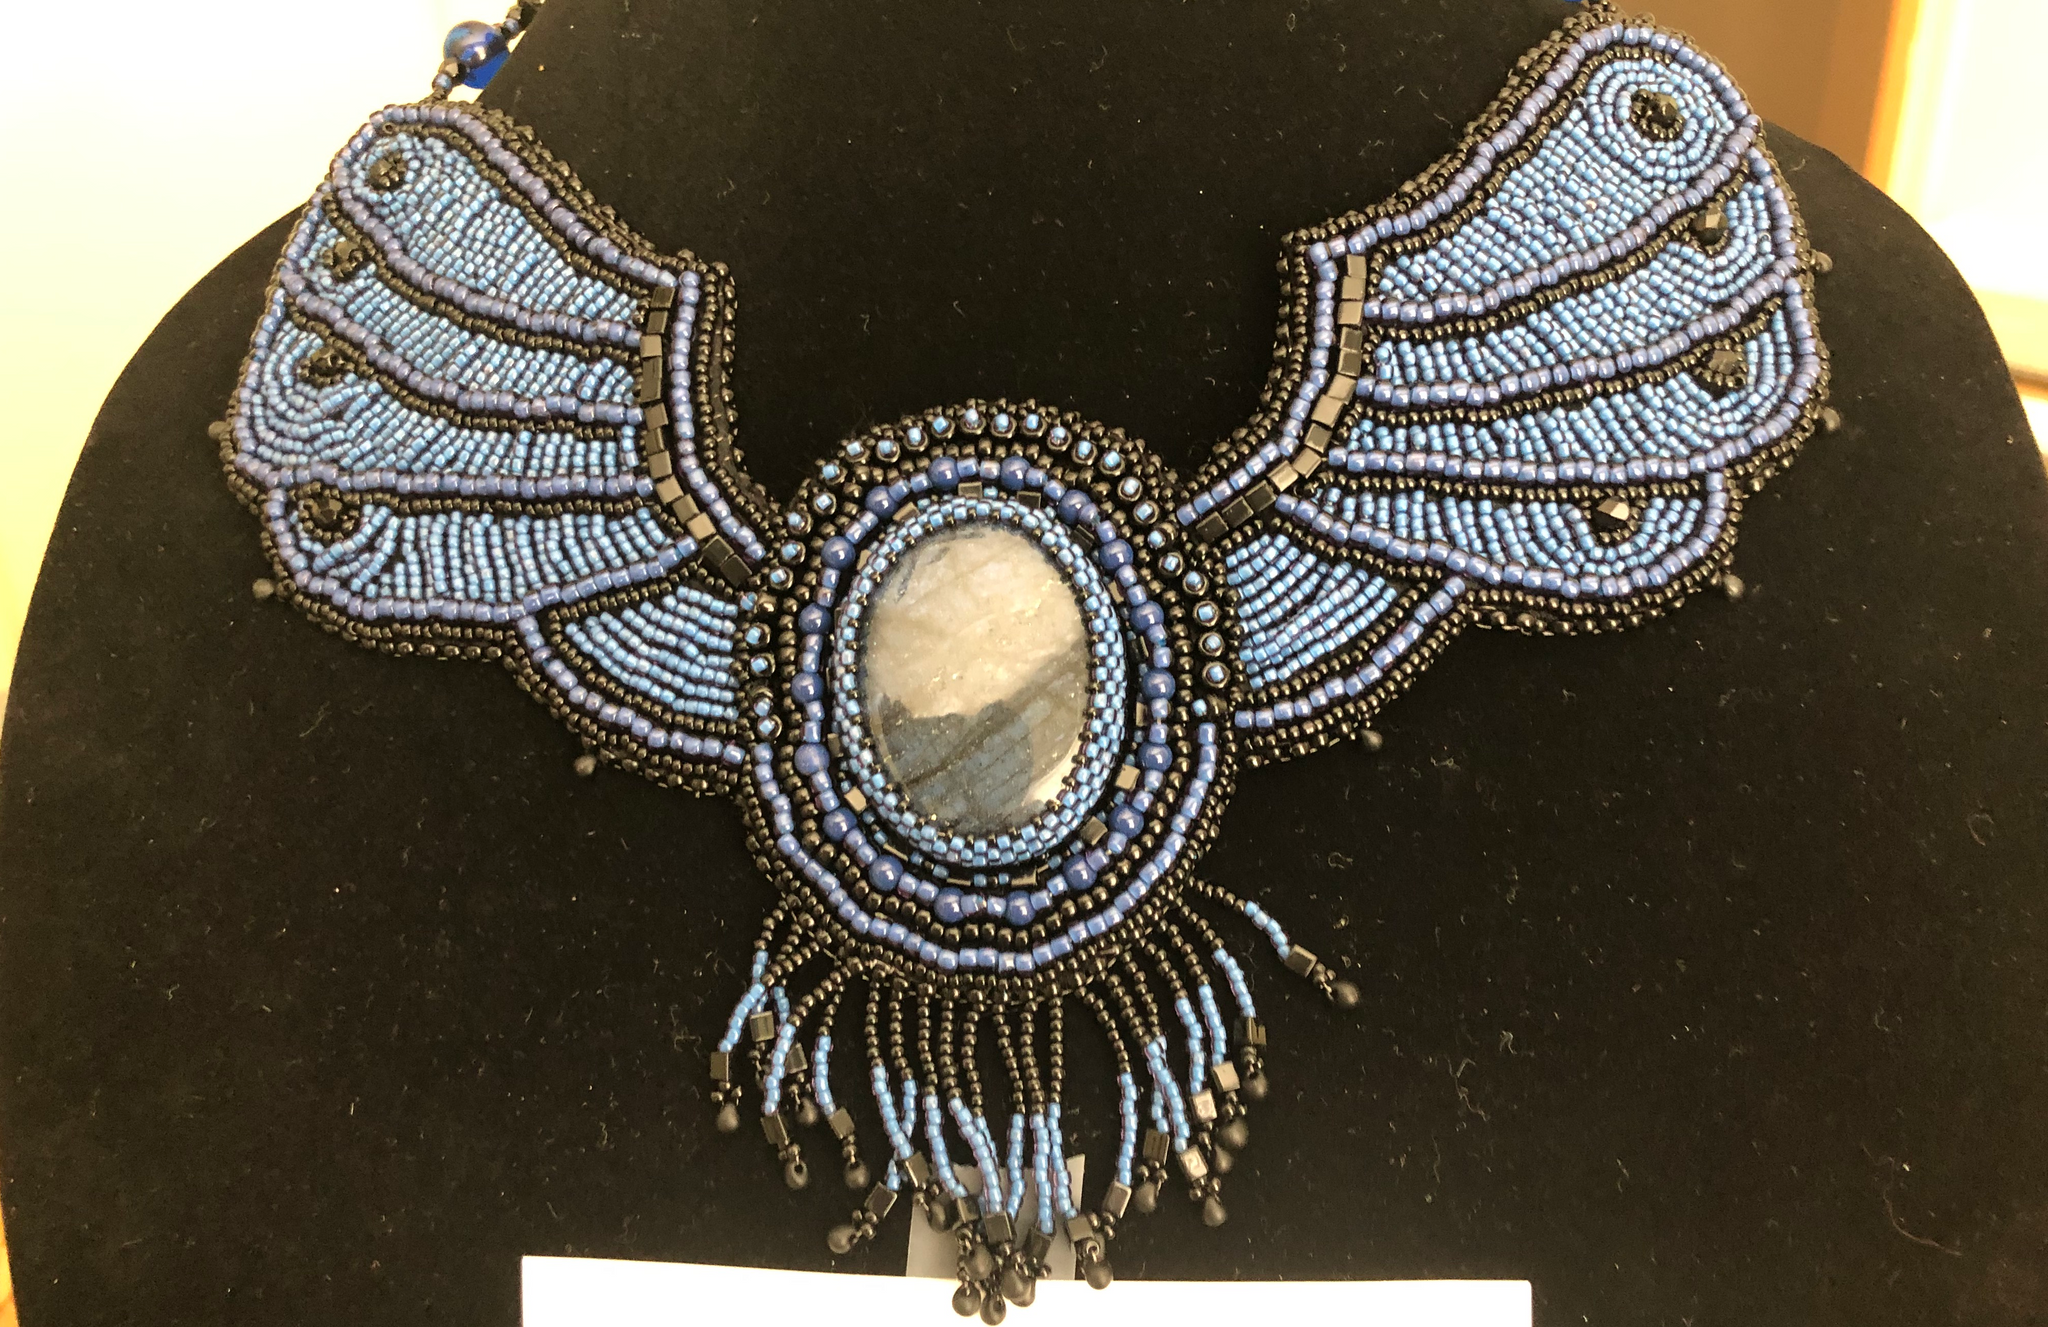 Taking Flight Bead Embroidery Necklace